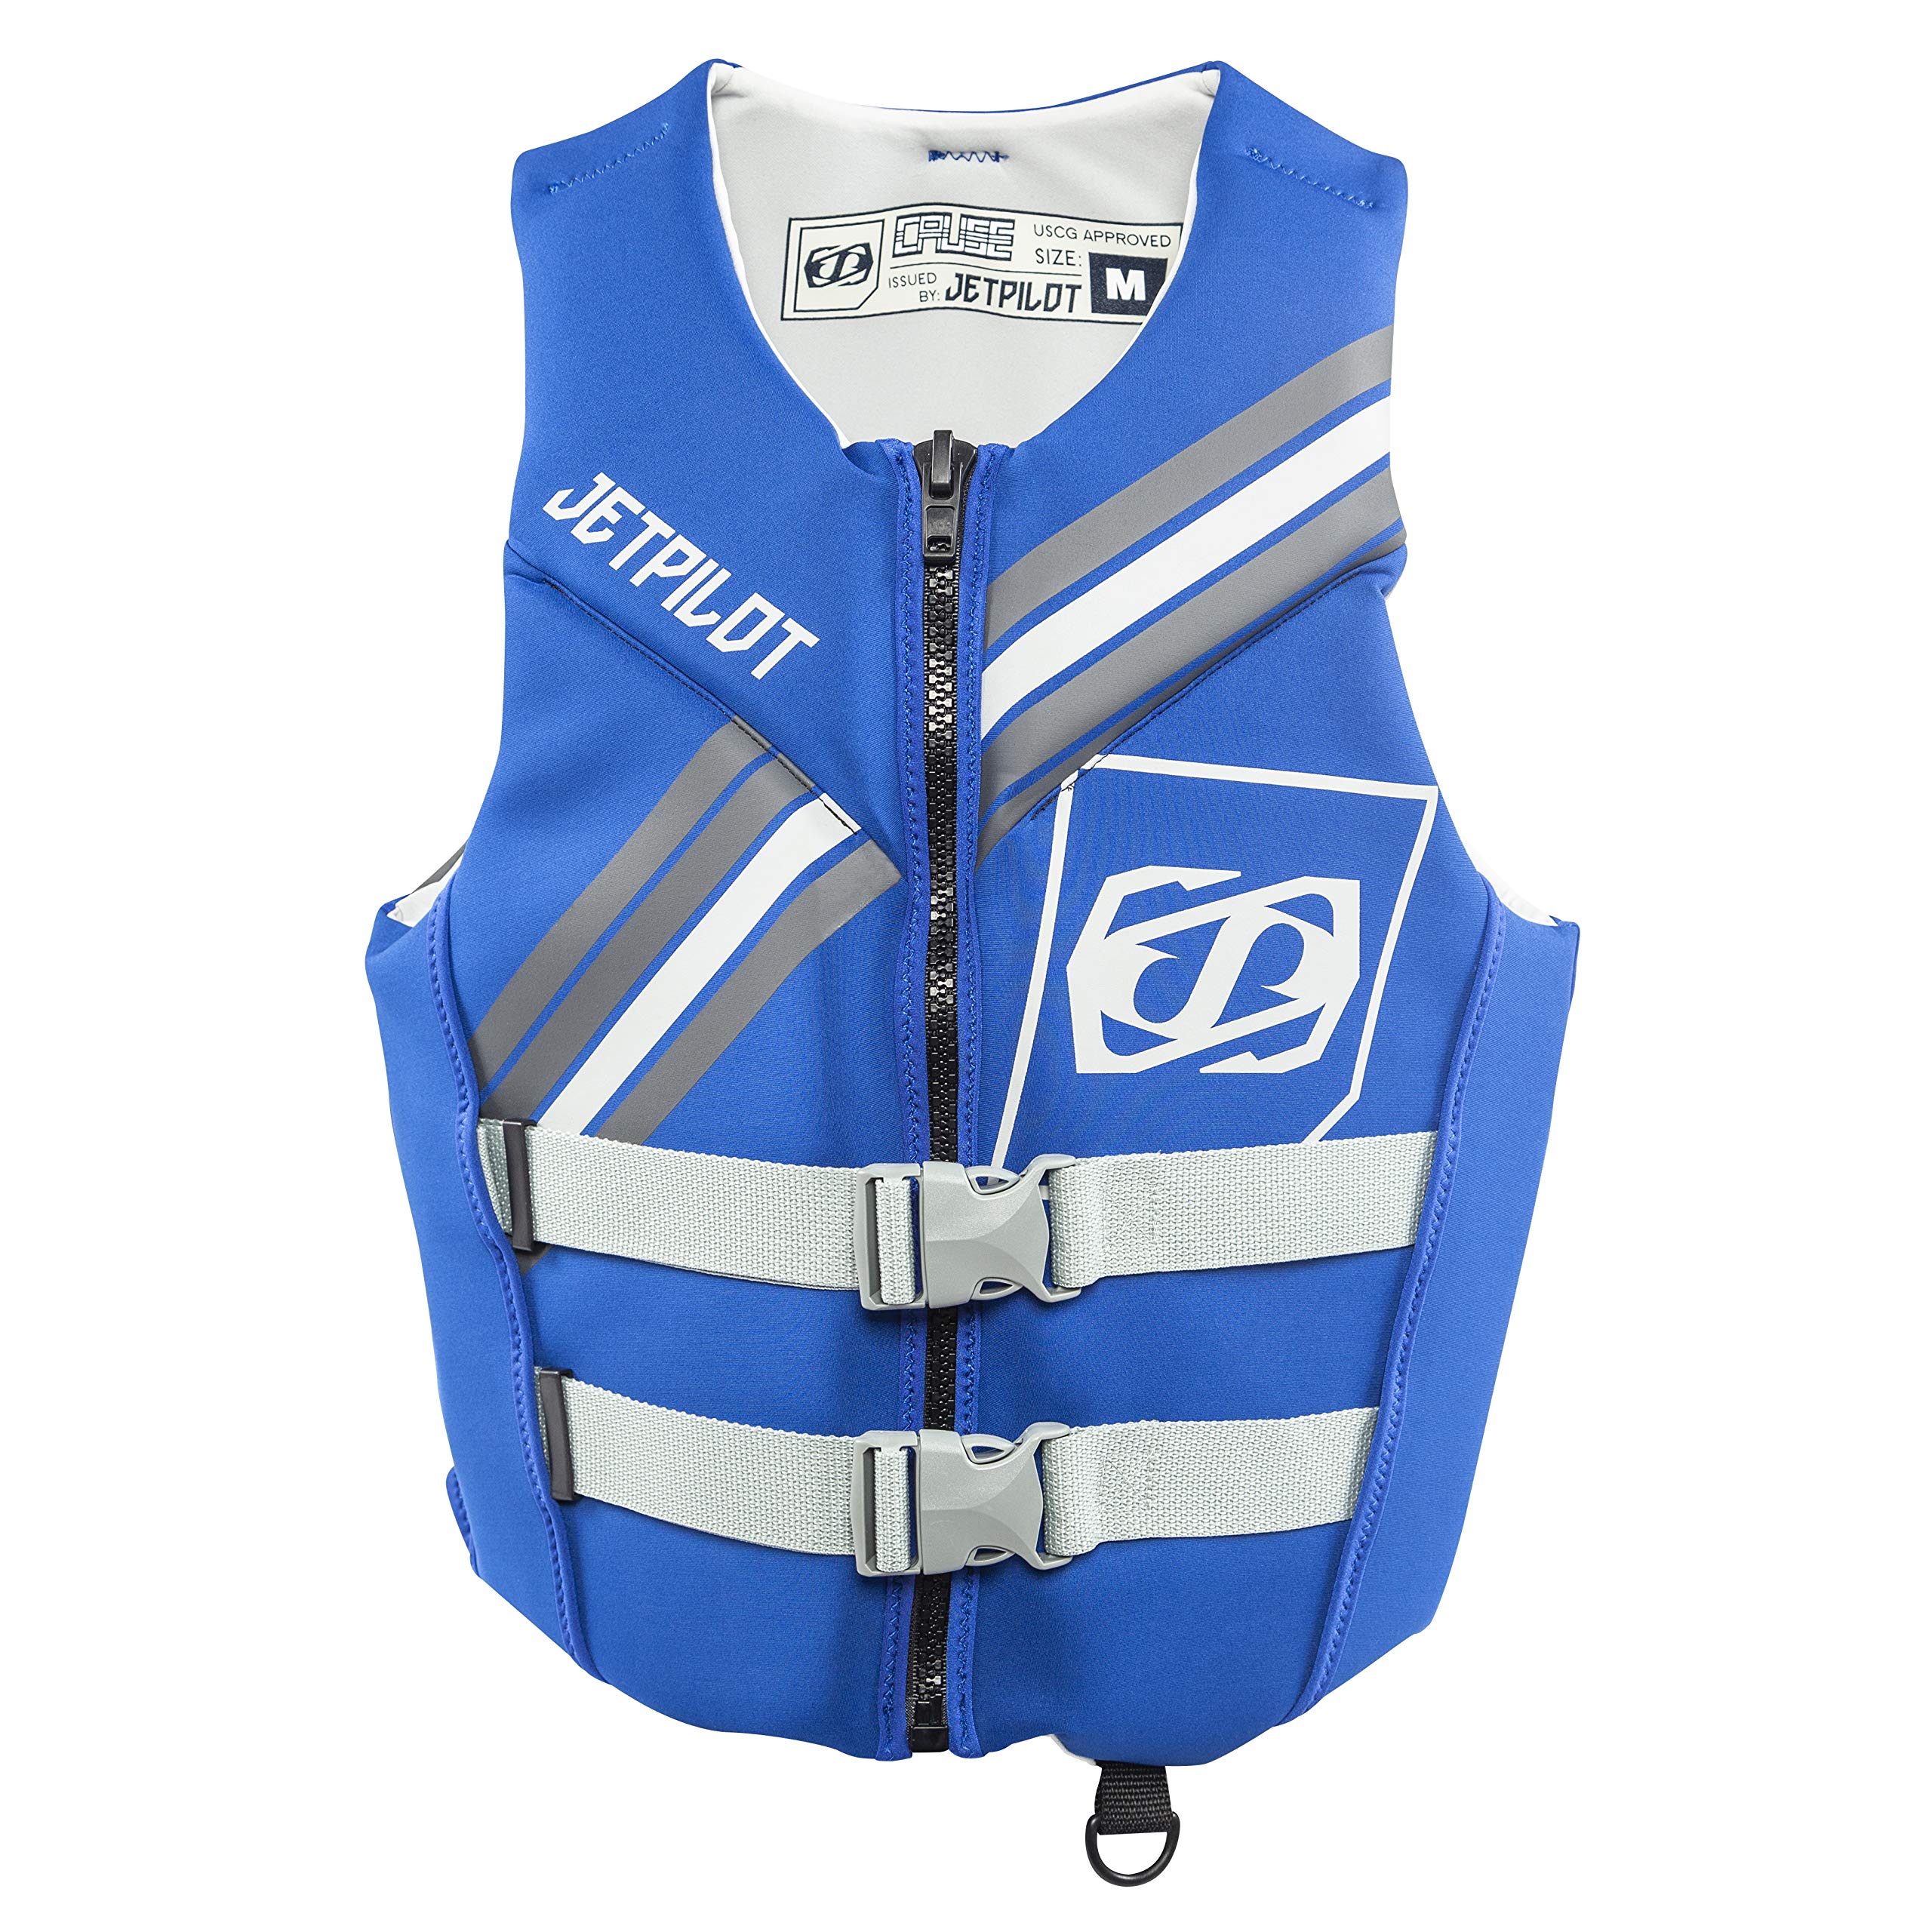 Jet Pilot Cause Neoprene CGA Vest-XL-Blue Adult Water Life Jacket Vest for Extreme Sports Boat Kayak Paddling Use and Safety